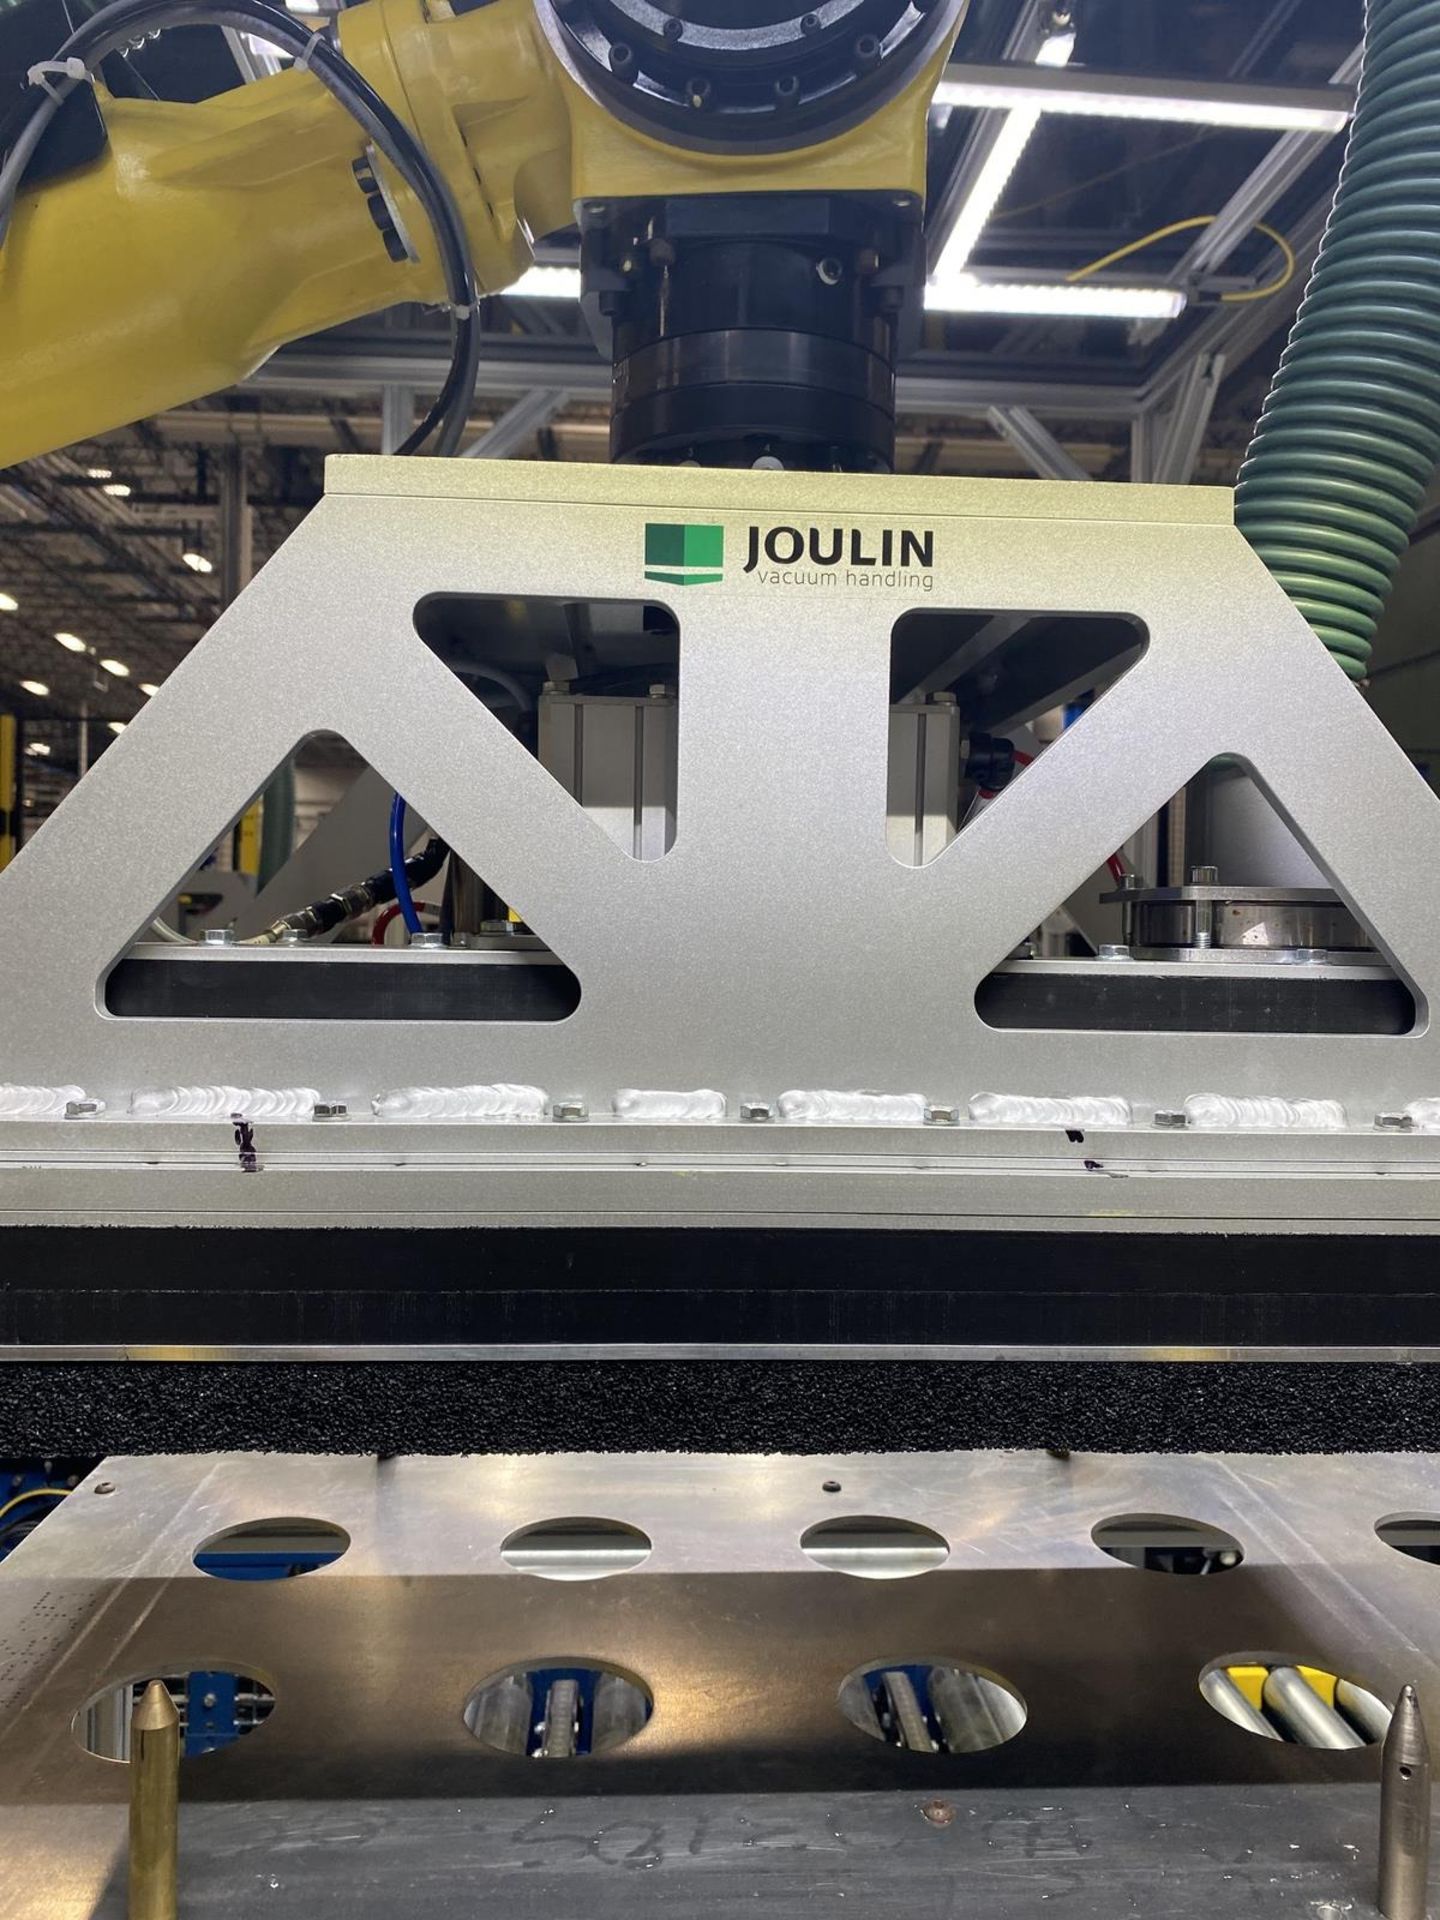 2015 Fanuc Robot M-710iC 50 Robot System with Vacuum Pump, Joulin Hea - Subj to Bulk | Rig Fee: $700 - Image 3 of 7